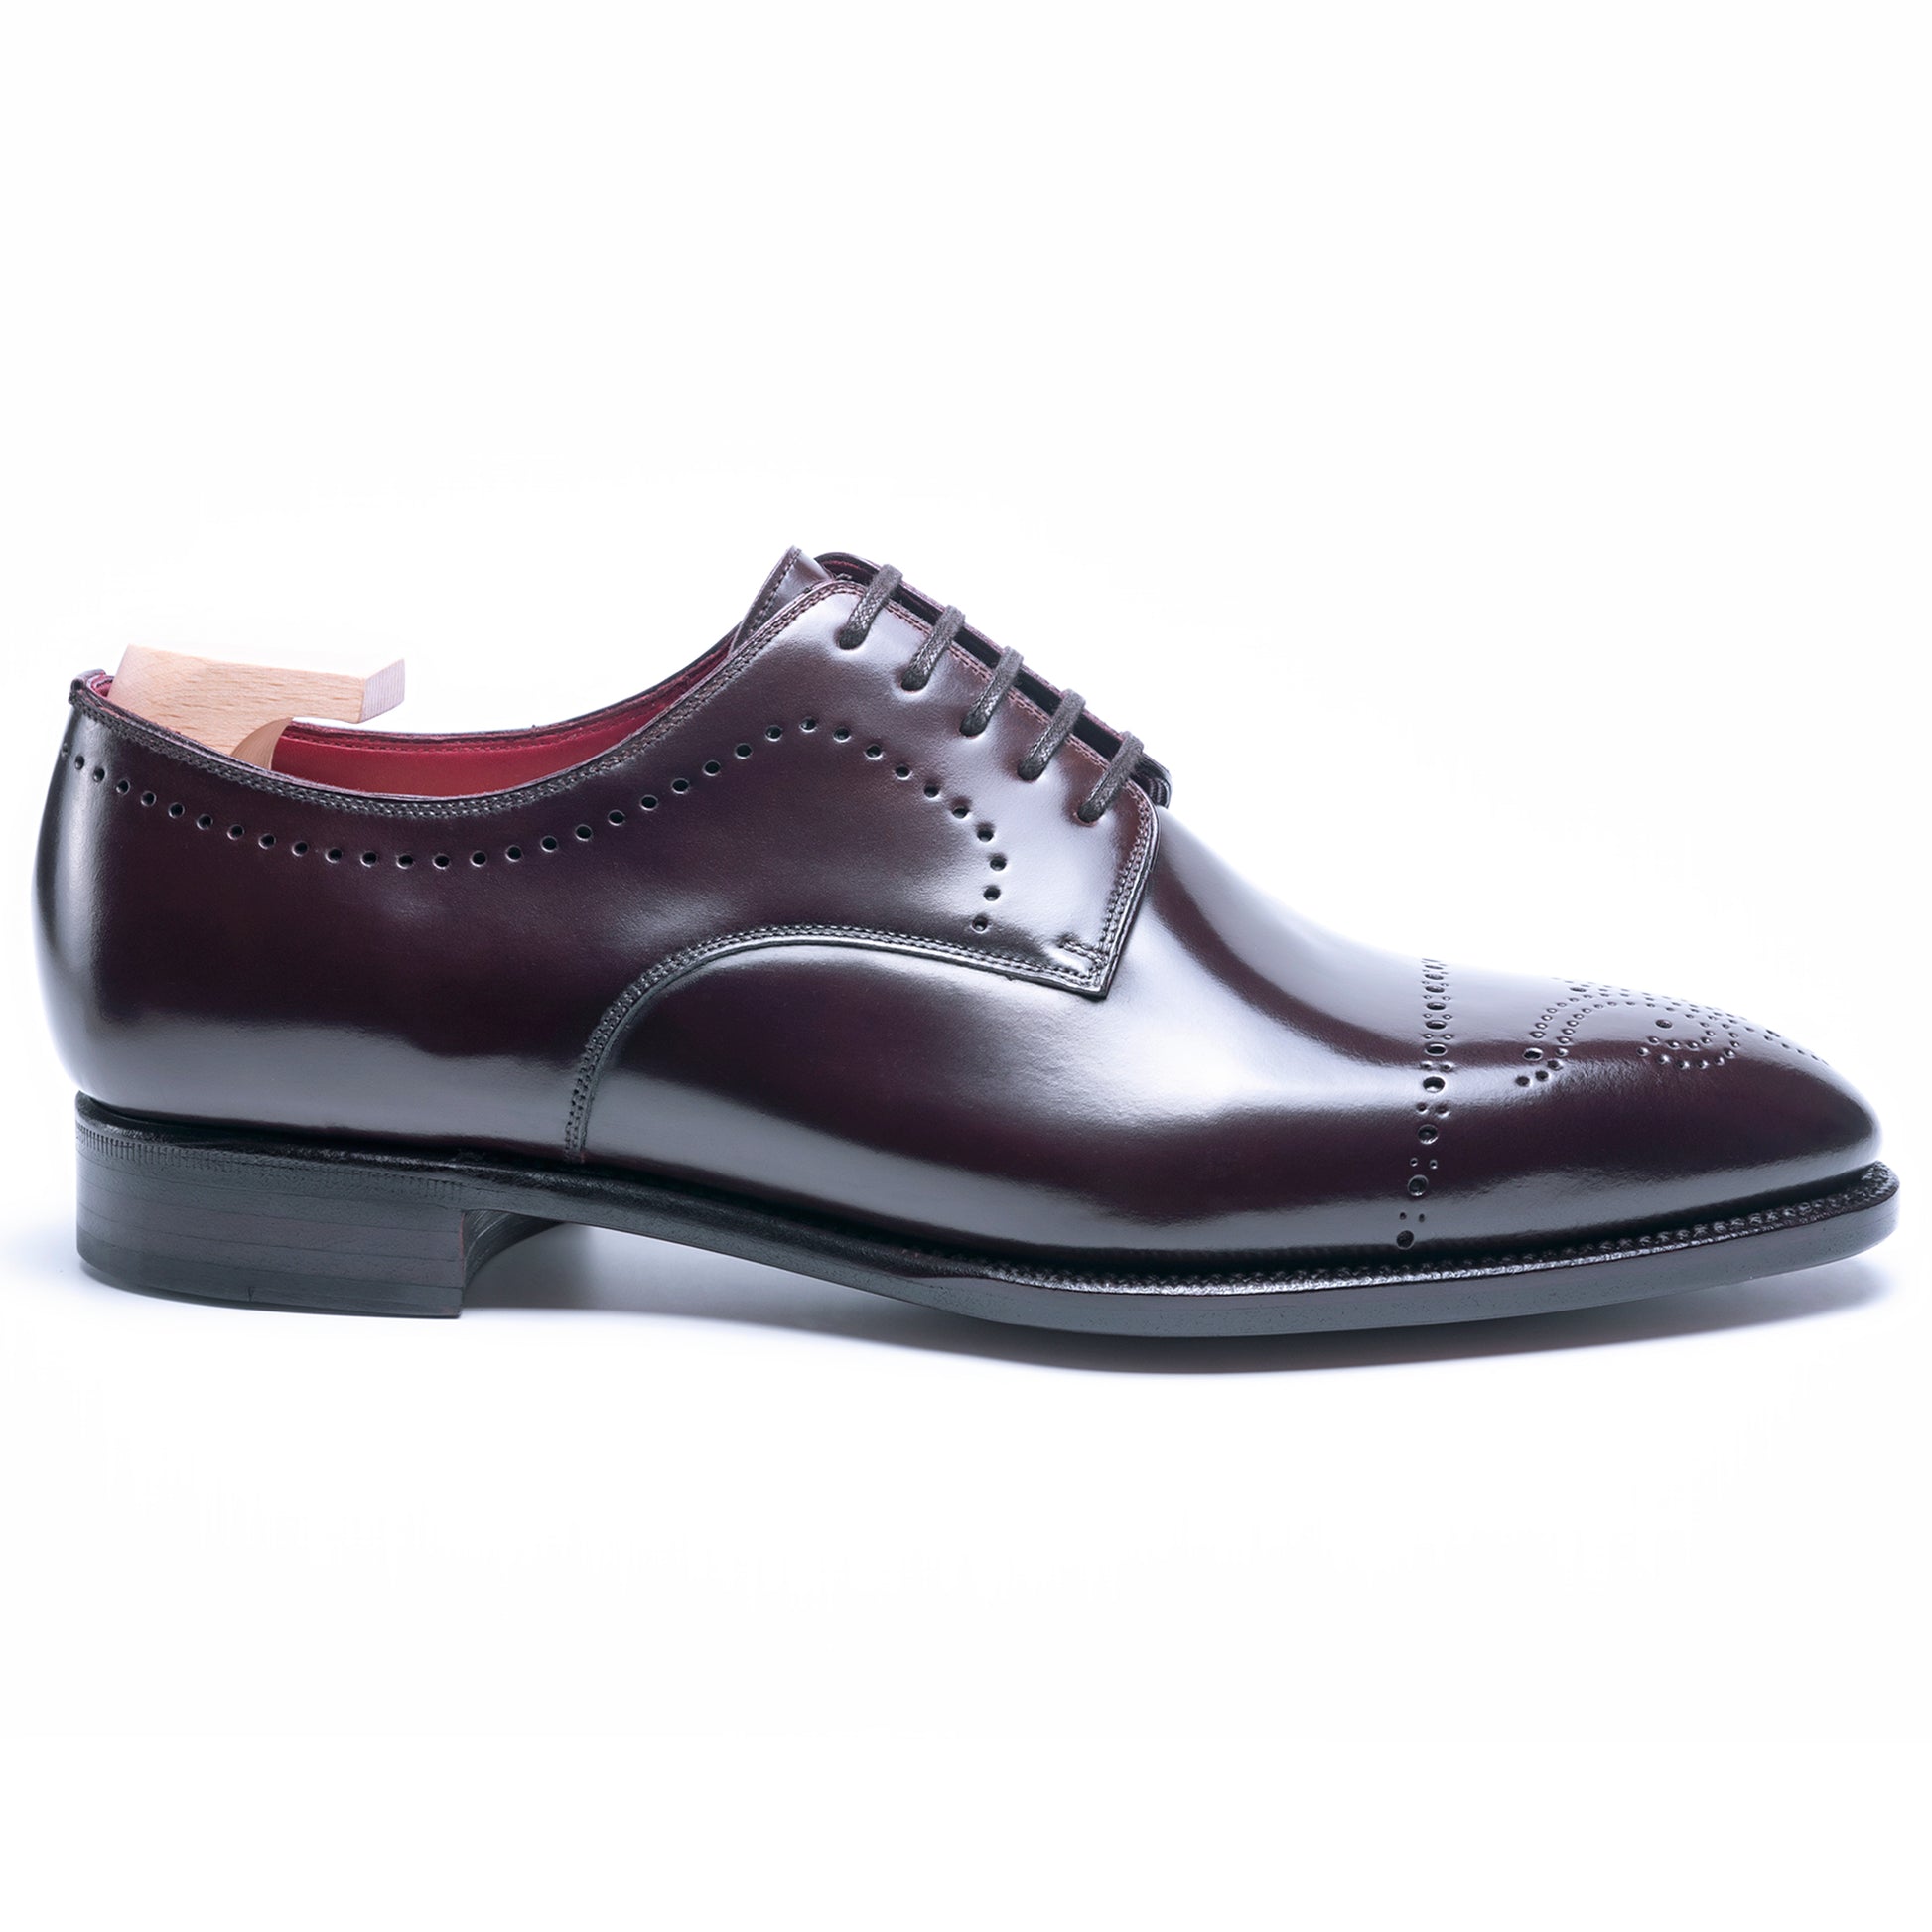 TLB Mallorca leather shoes - Men's Oxford shoes